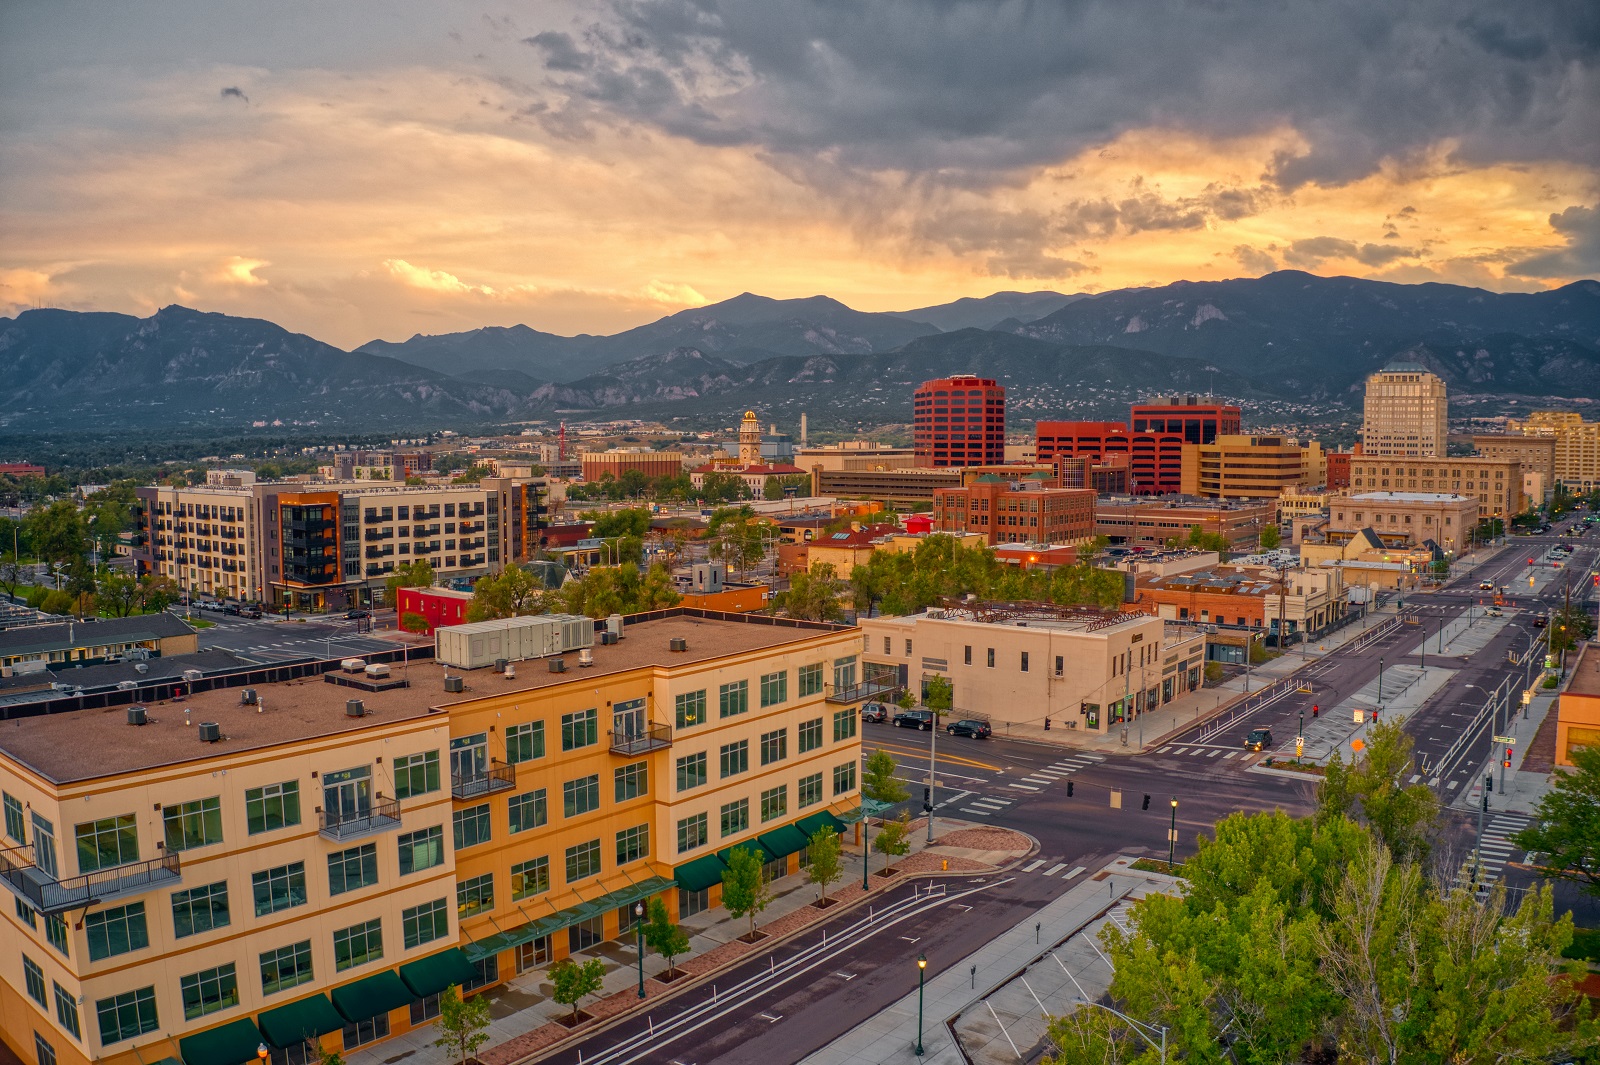 <p class="wp-caption-text">Image Credit: Shutterstock / Jacob Boomsma</p>  <p><span>The scenic city of Colorado Springs offers ample parking and a straightforward layout that makes driving enjoyable and often necessary given its geographic spread.</span></p>